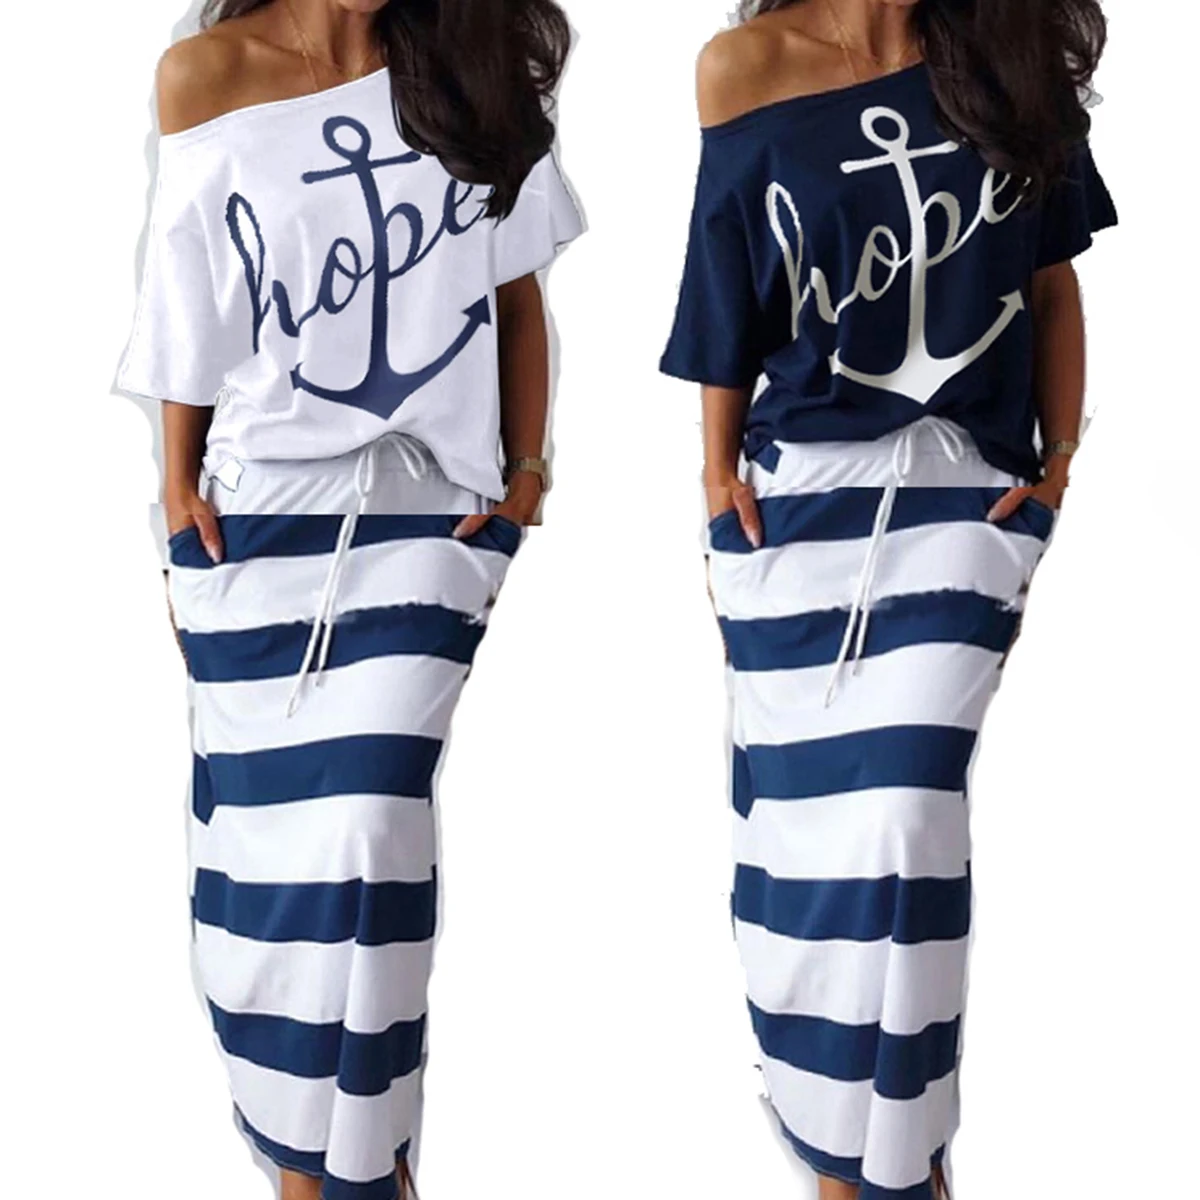 Summer Plus Size Elegant Vacation Leisure Two-pieces Suit Sets Ladies Boat Anchor Print T-Shirt & Striped Maxi Skirt Sets S-3XL